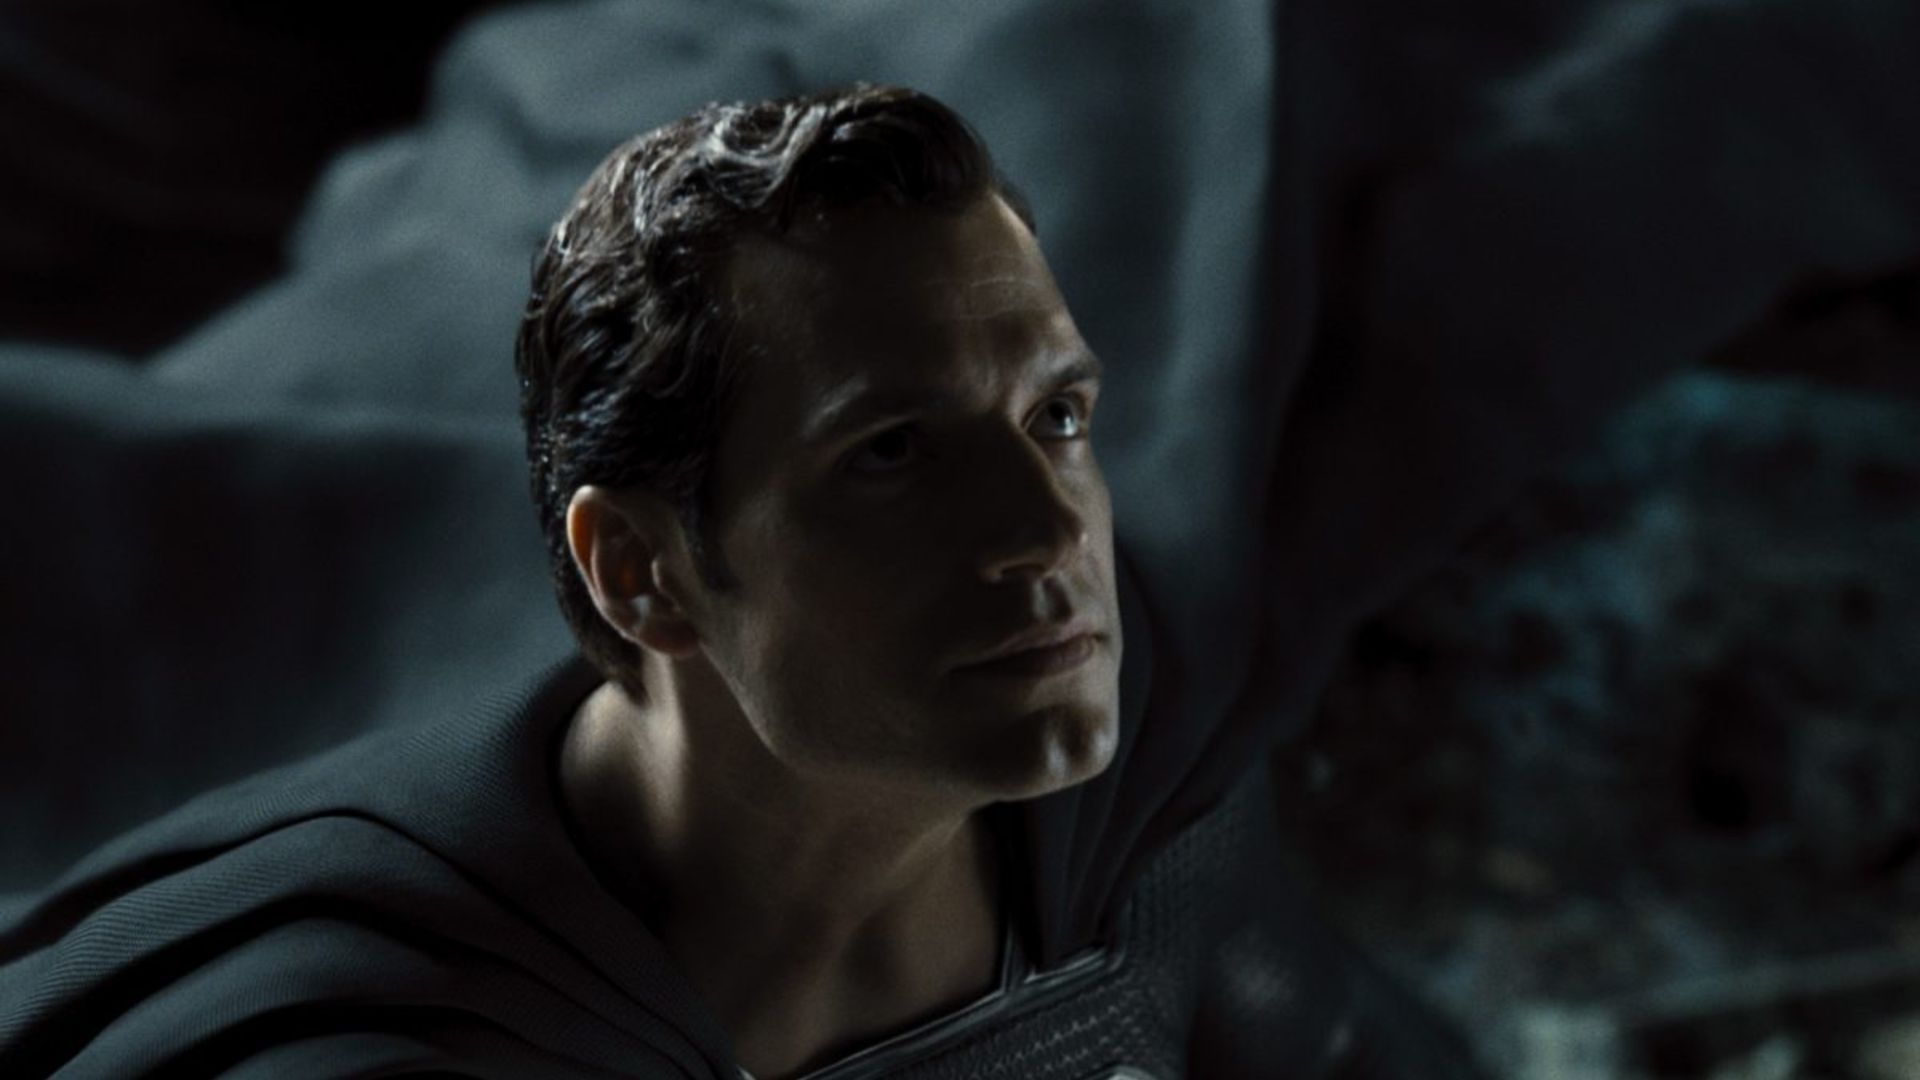 Justice League Snyder Cut almost gave Superman a beard and a mullet